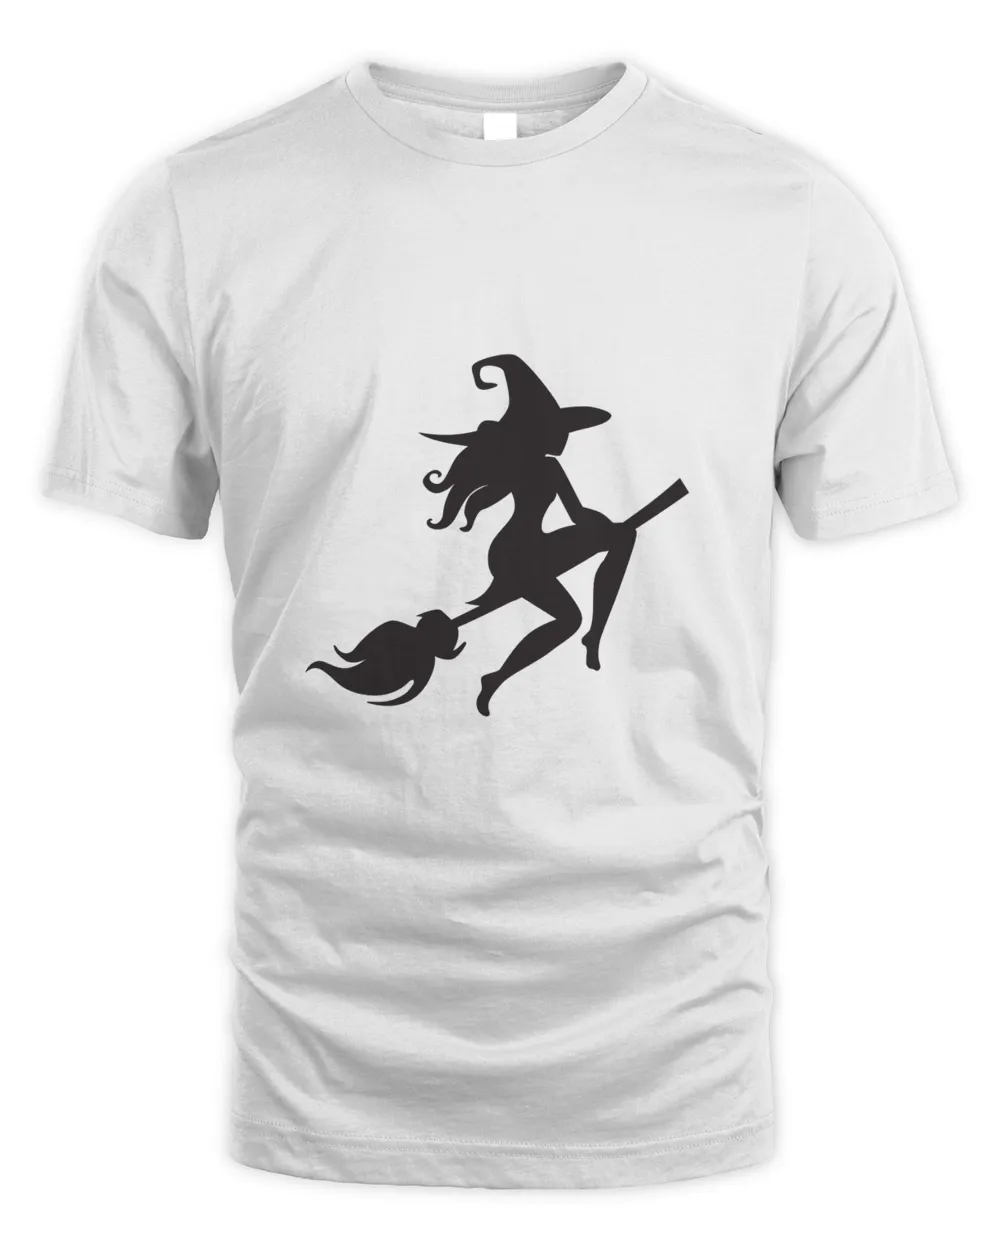 Witch riding broom t shirt hoodie sweater